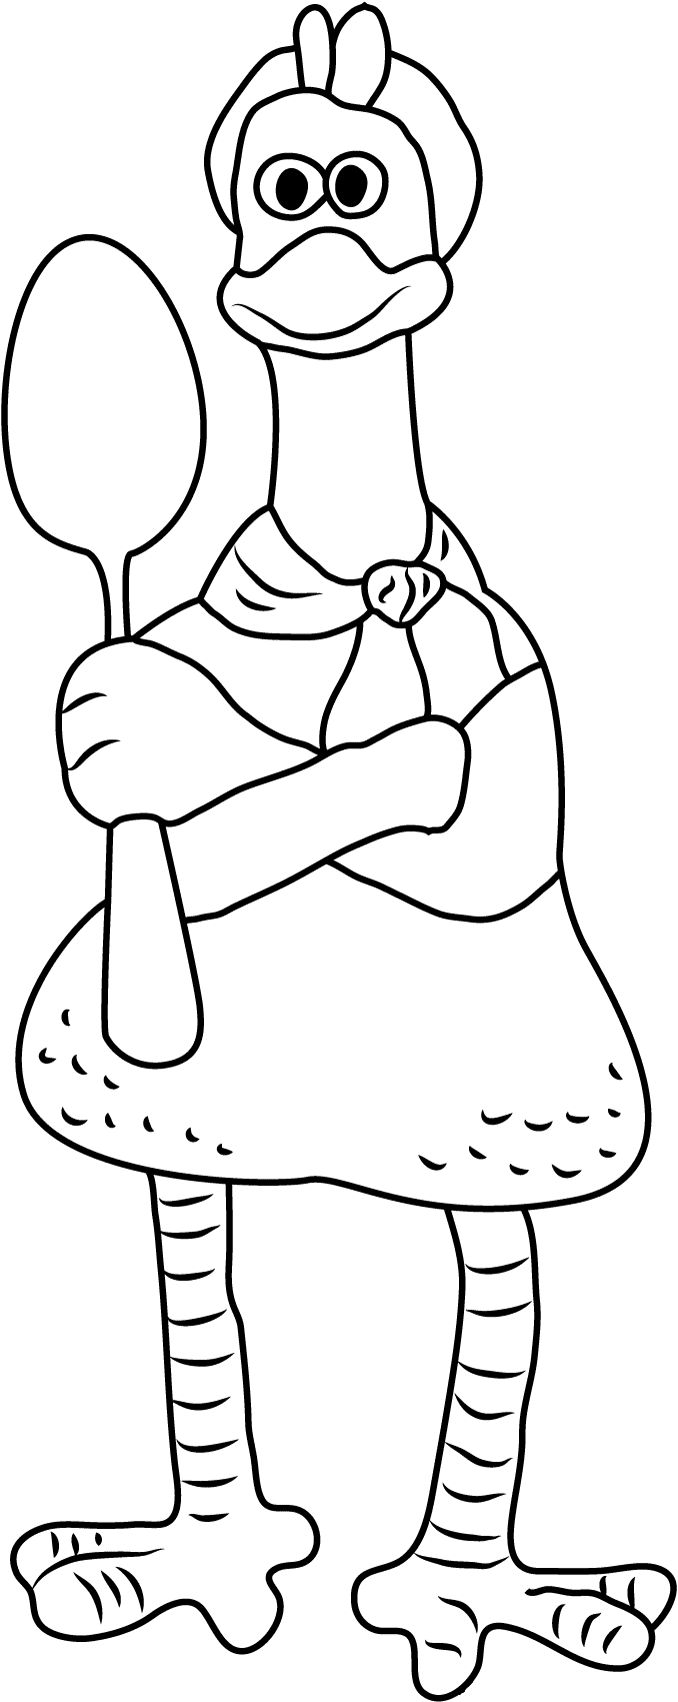 Ginger Holding Spoon Coloring Pages